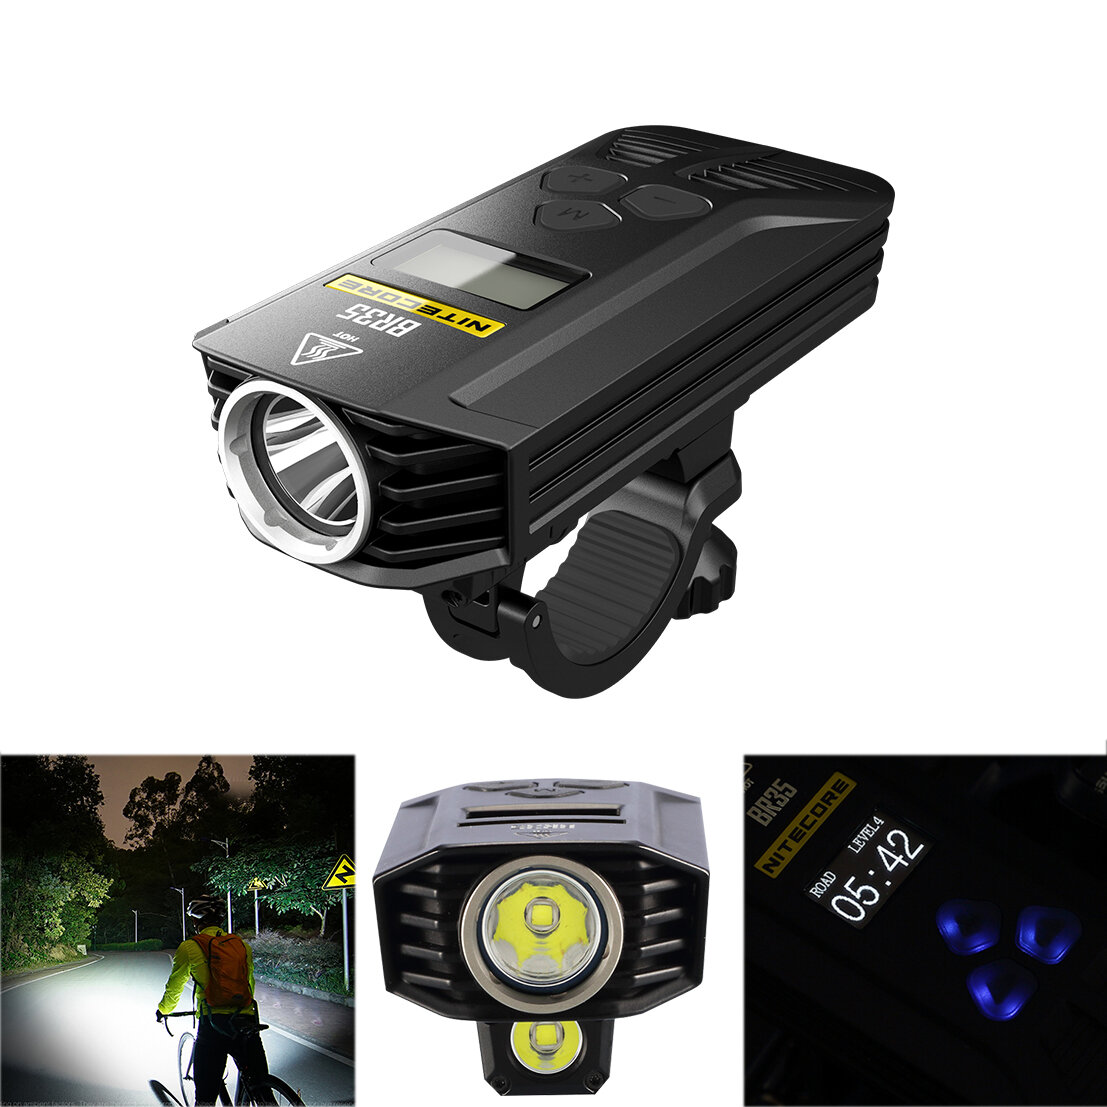 best price,nitecore,br35,1800lm,bicycle,lamp,discount